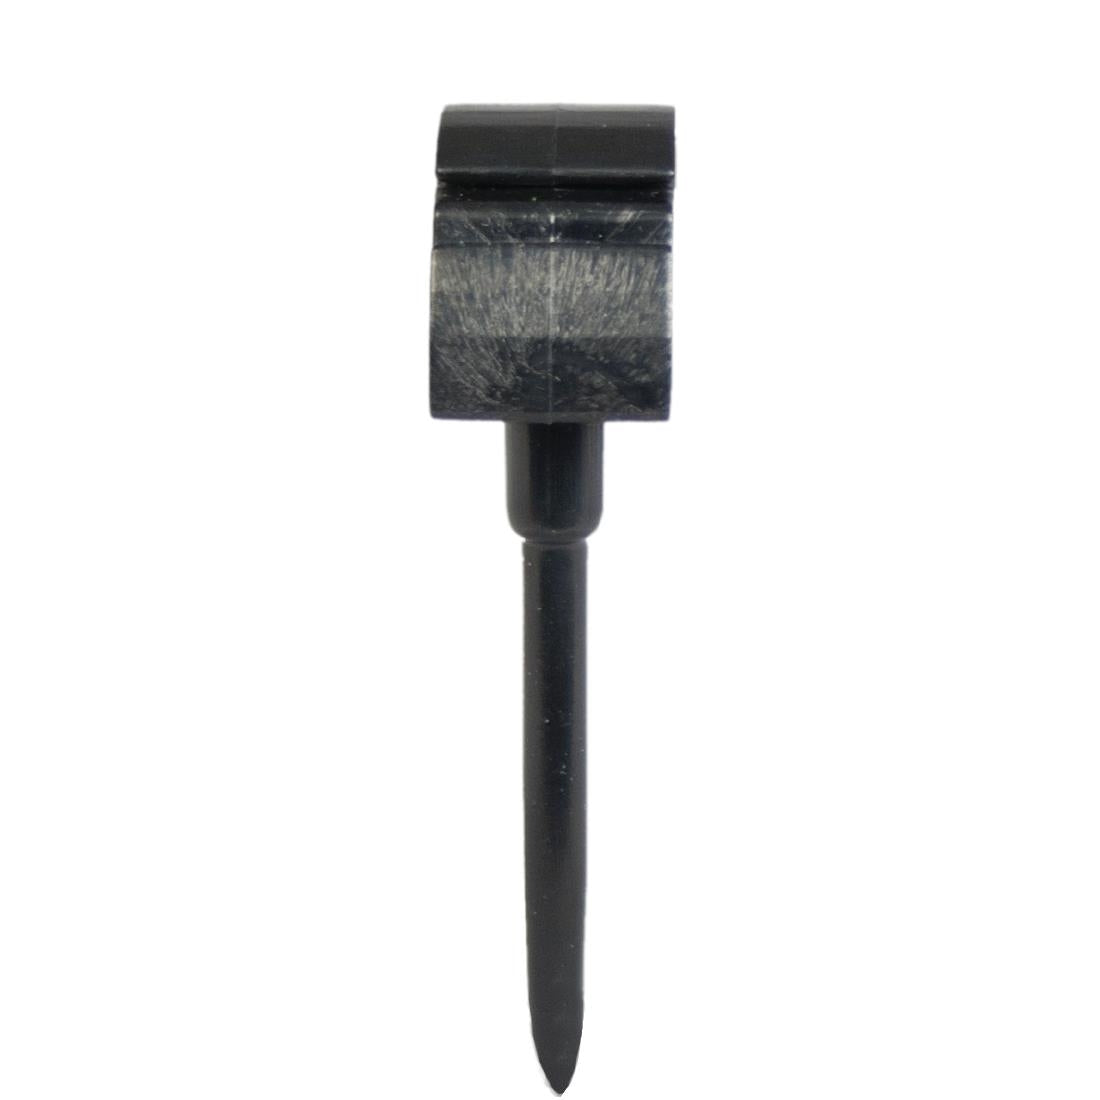 Mounting Spikes for Securit Mini Chalkboard Tags (CL310) (Pack of 20)